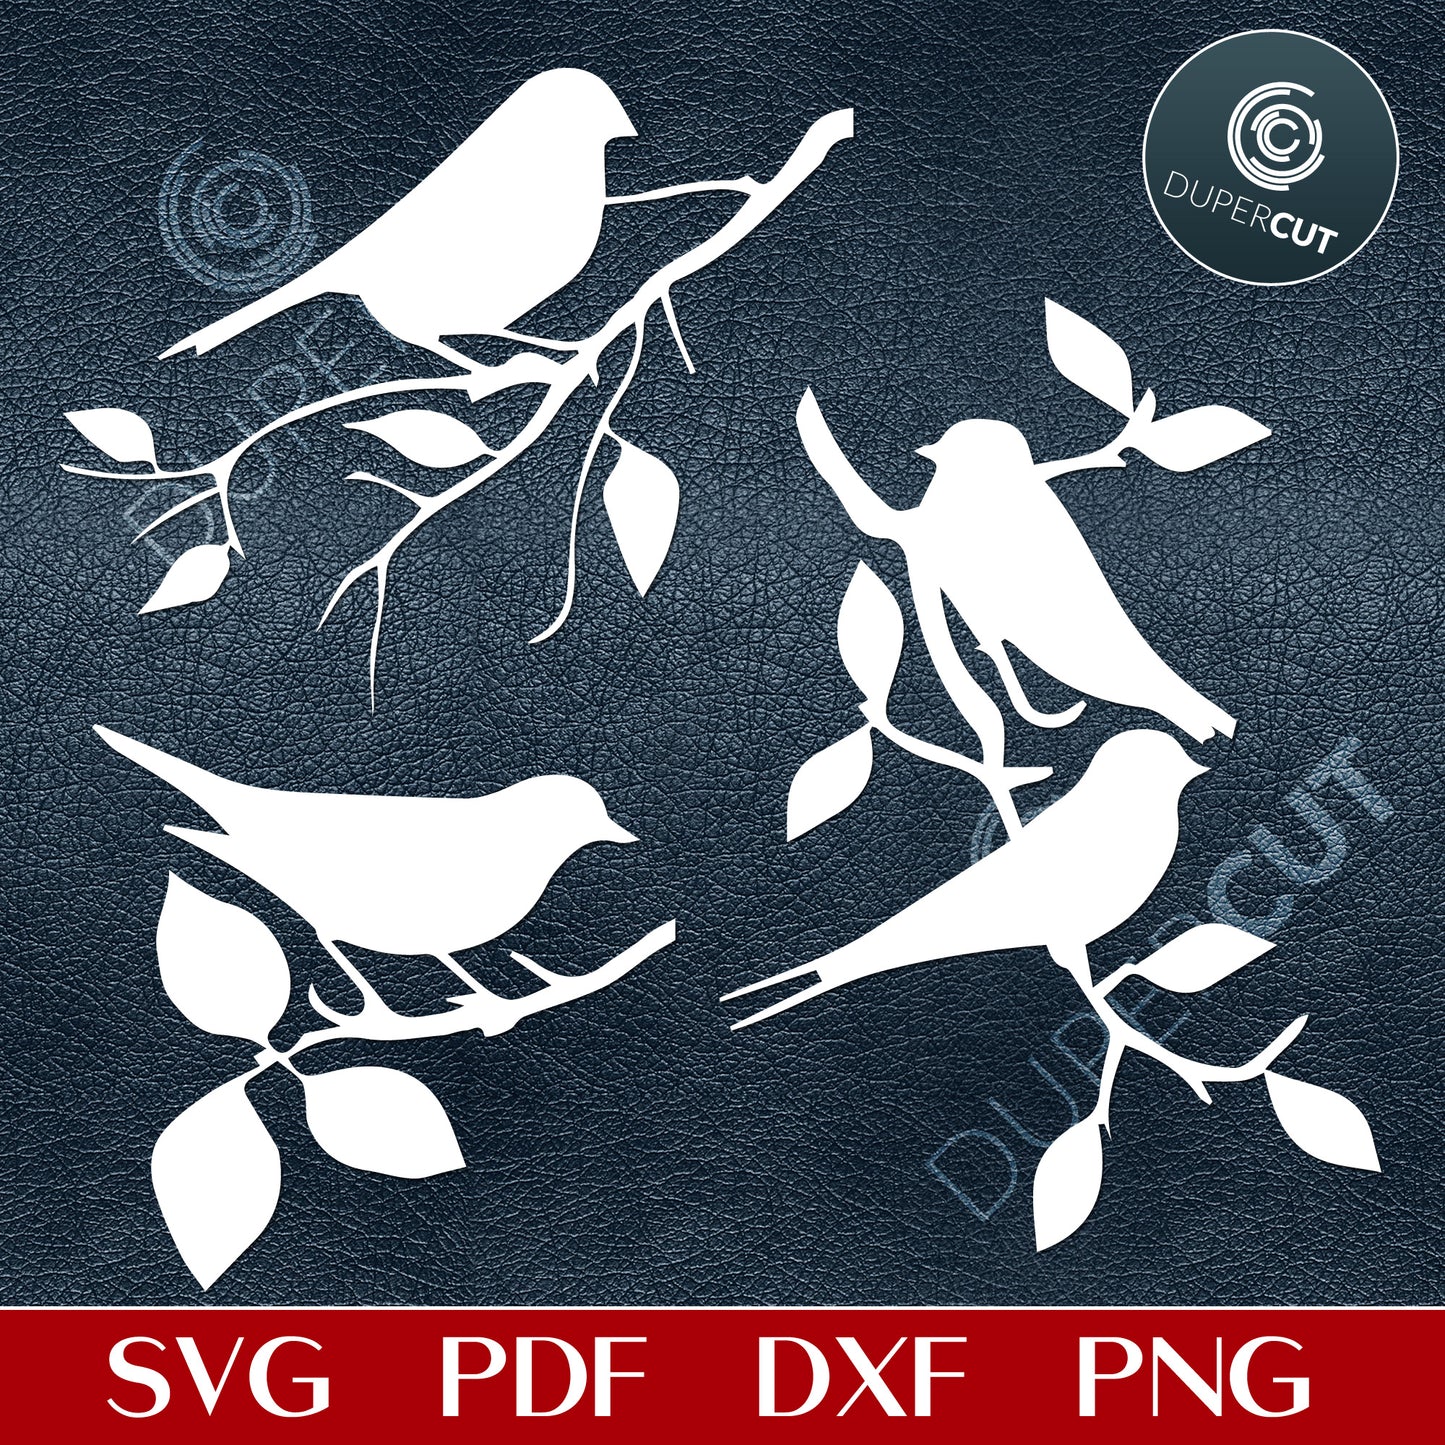 Bird on a branch, for beginners, laser paper cutting, engraving, mold making. - SVG DXF PNG vector files for laser and CNC machines, Cricut, Silhouette Cameo, Glowforge projects. 